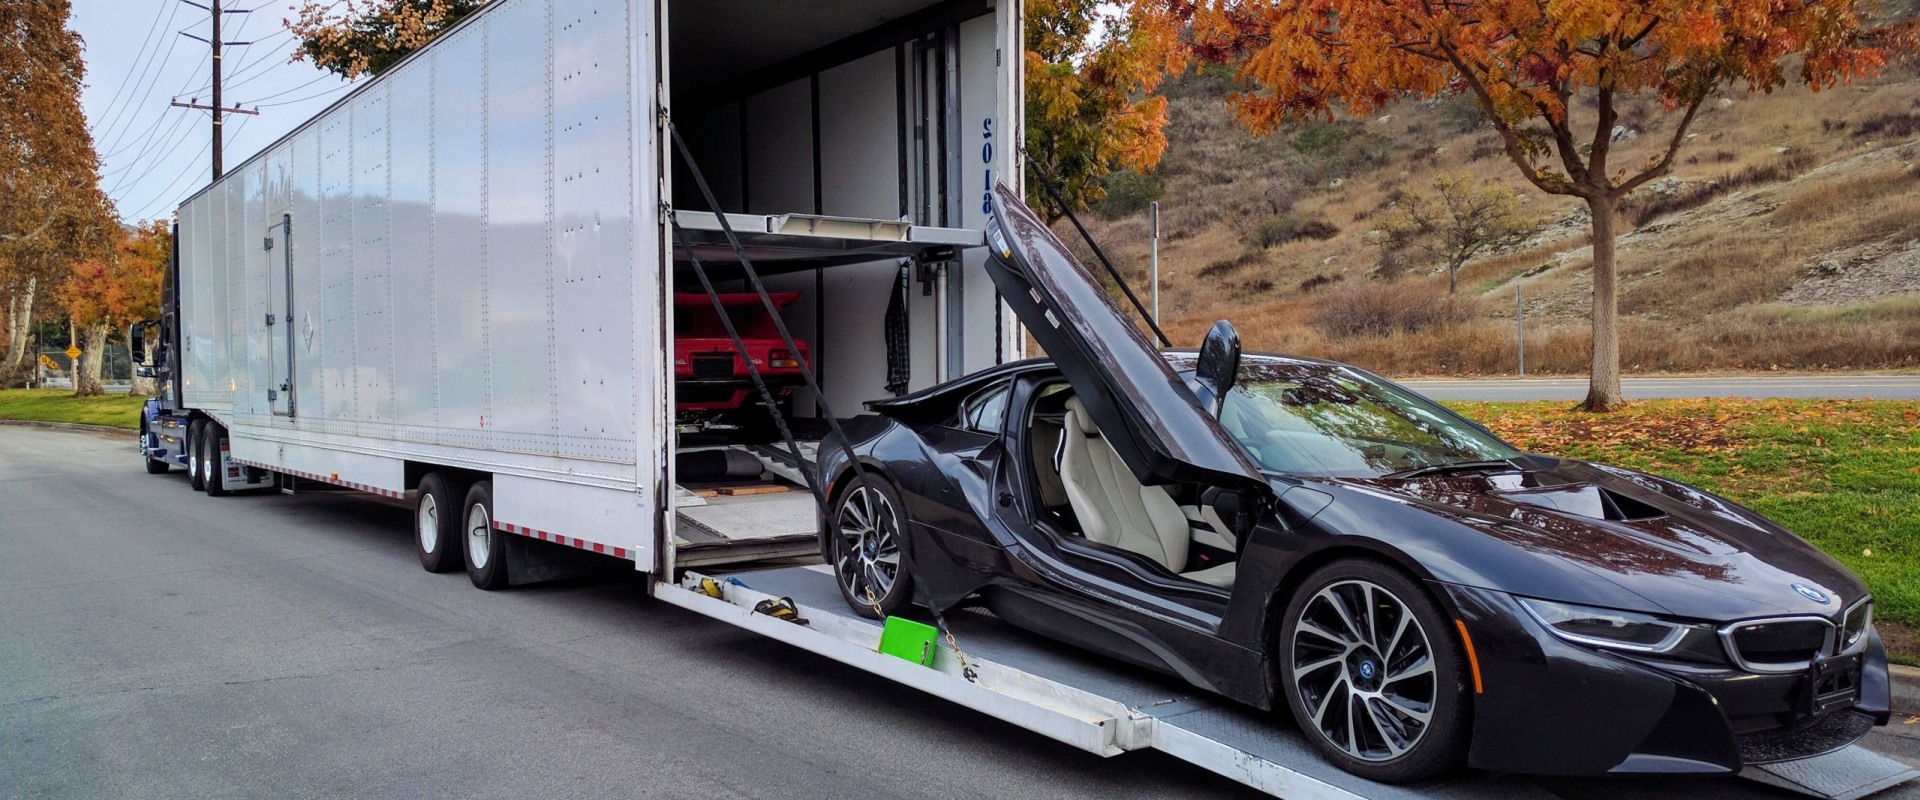 Car Shipping Companies in Houston: Everything You Need to Know